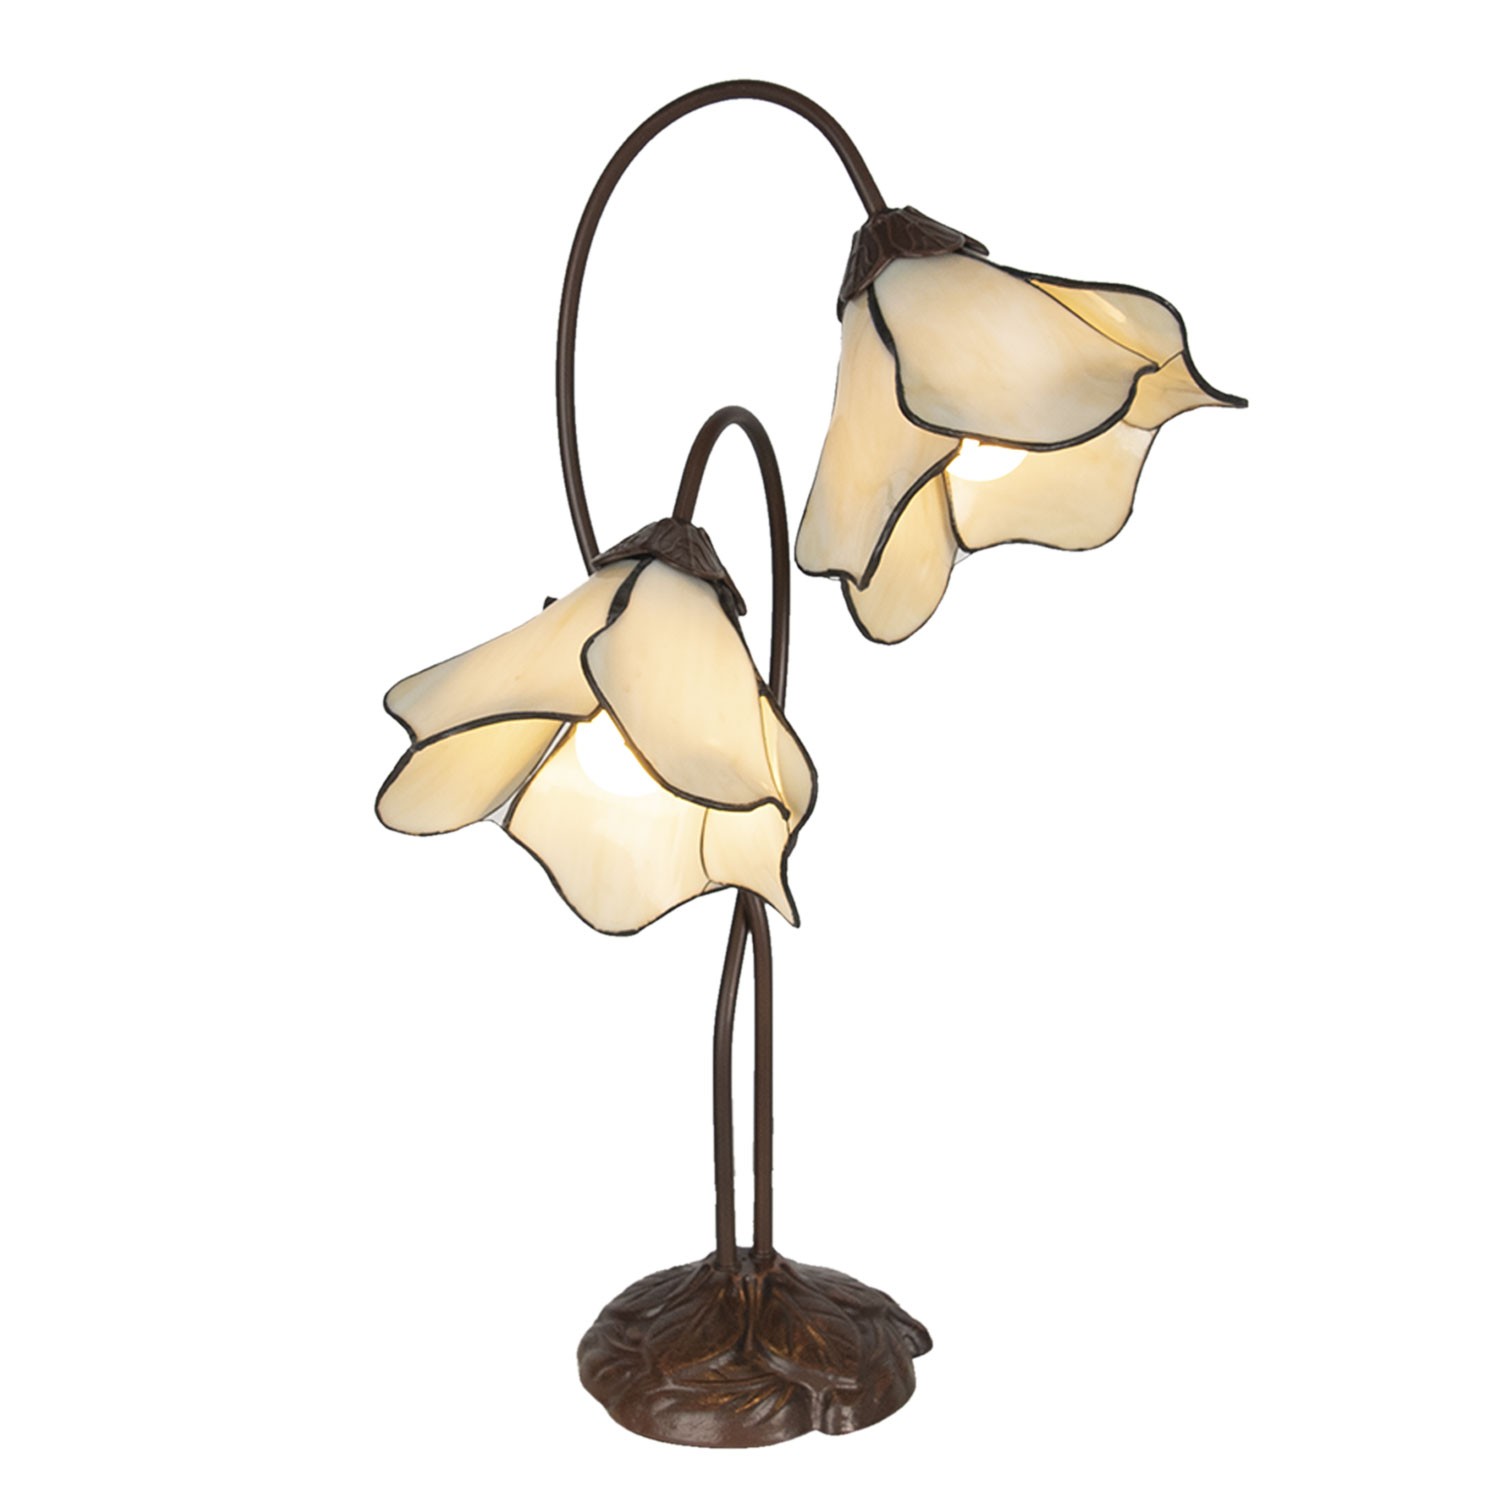 Tiffany stolní lampa Cloches - 41*23*57 cm E27/max 2*40W Clayre & Eef